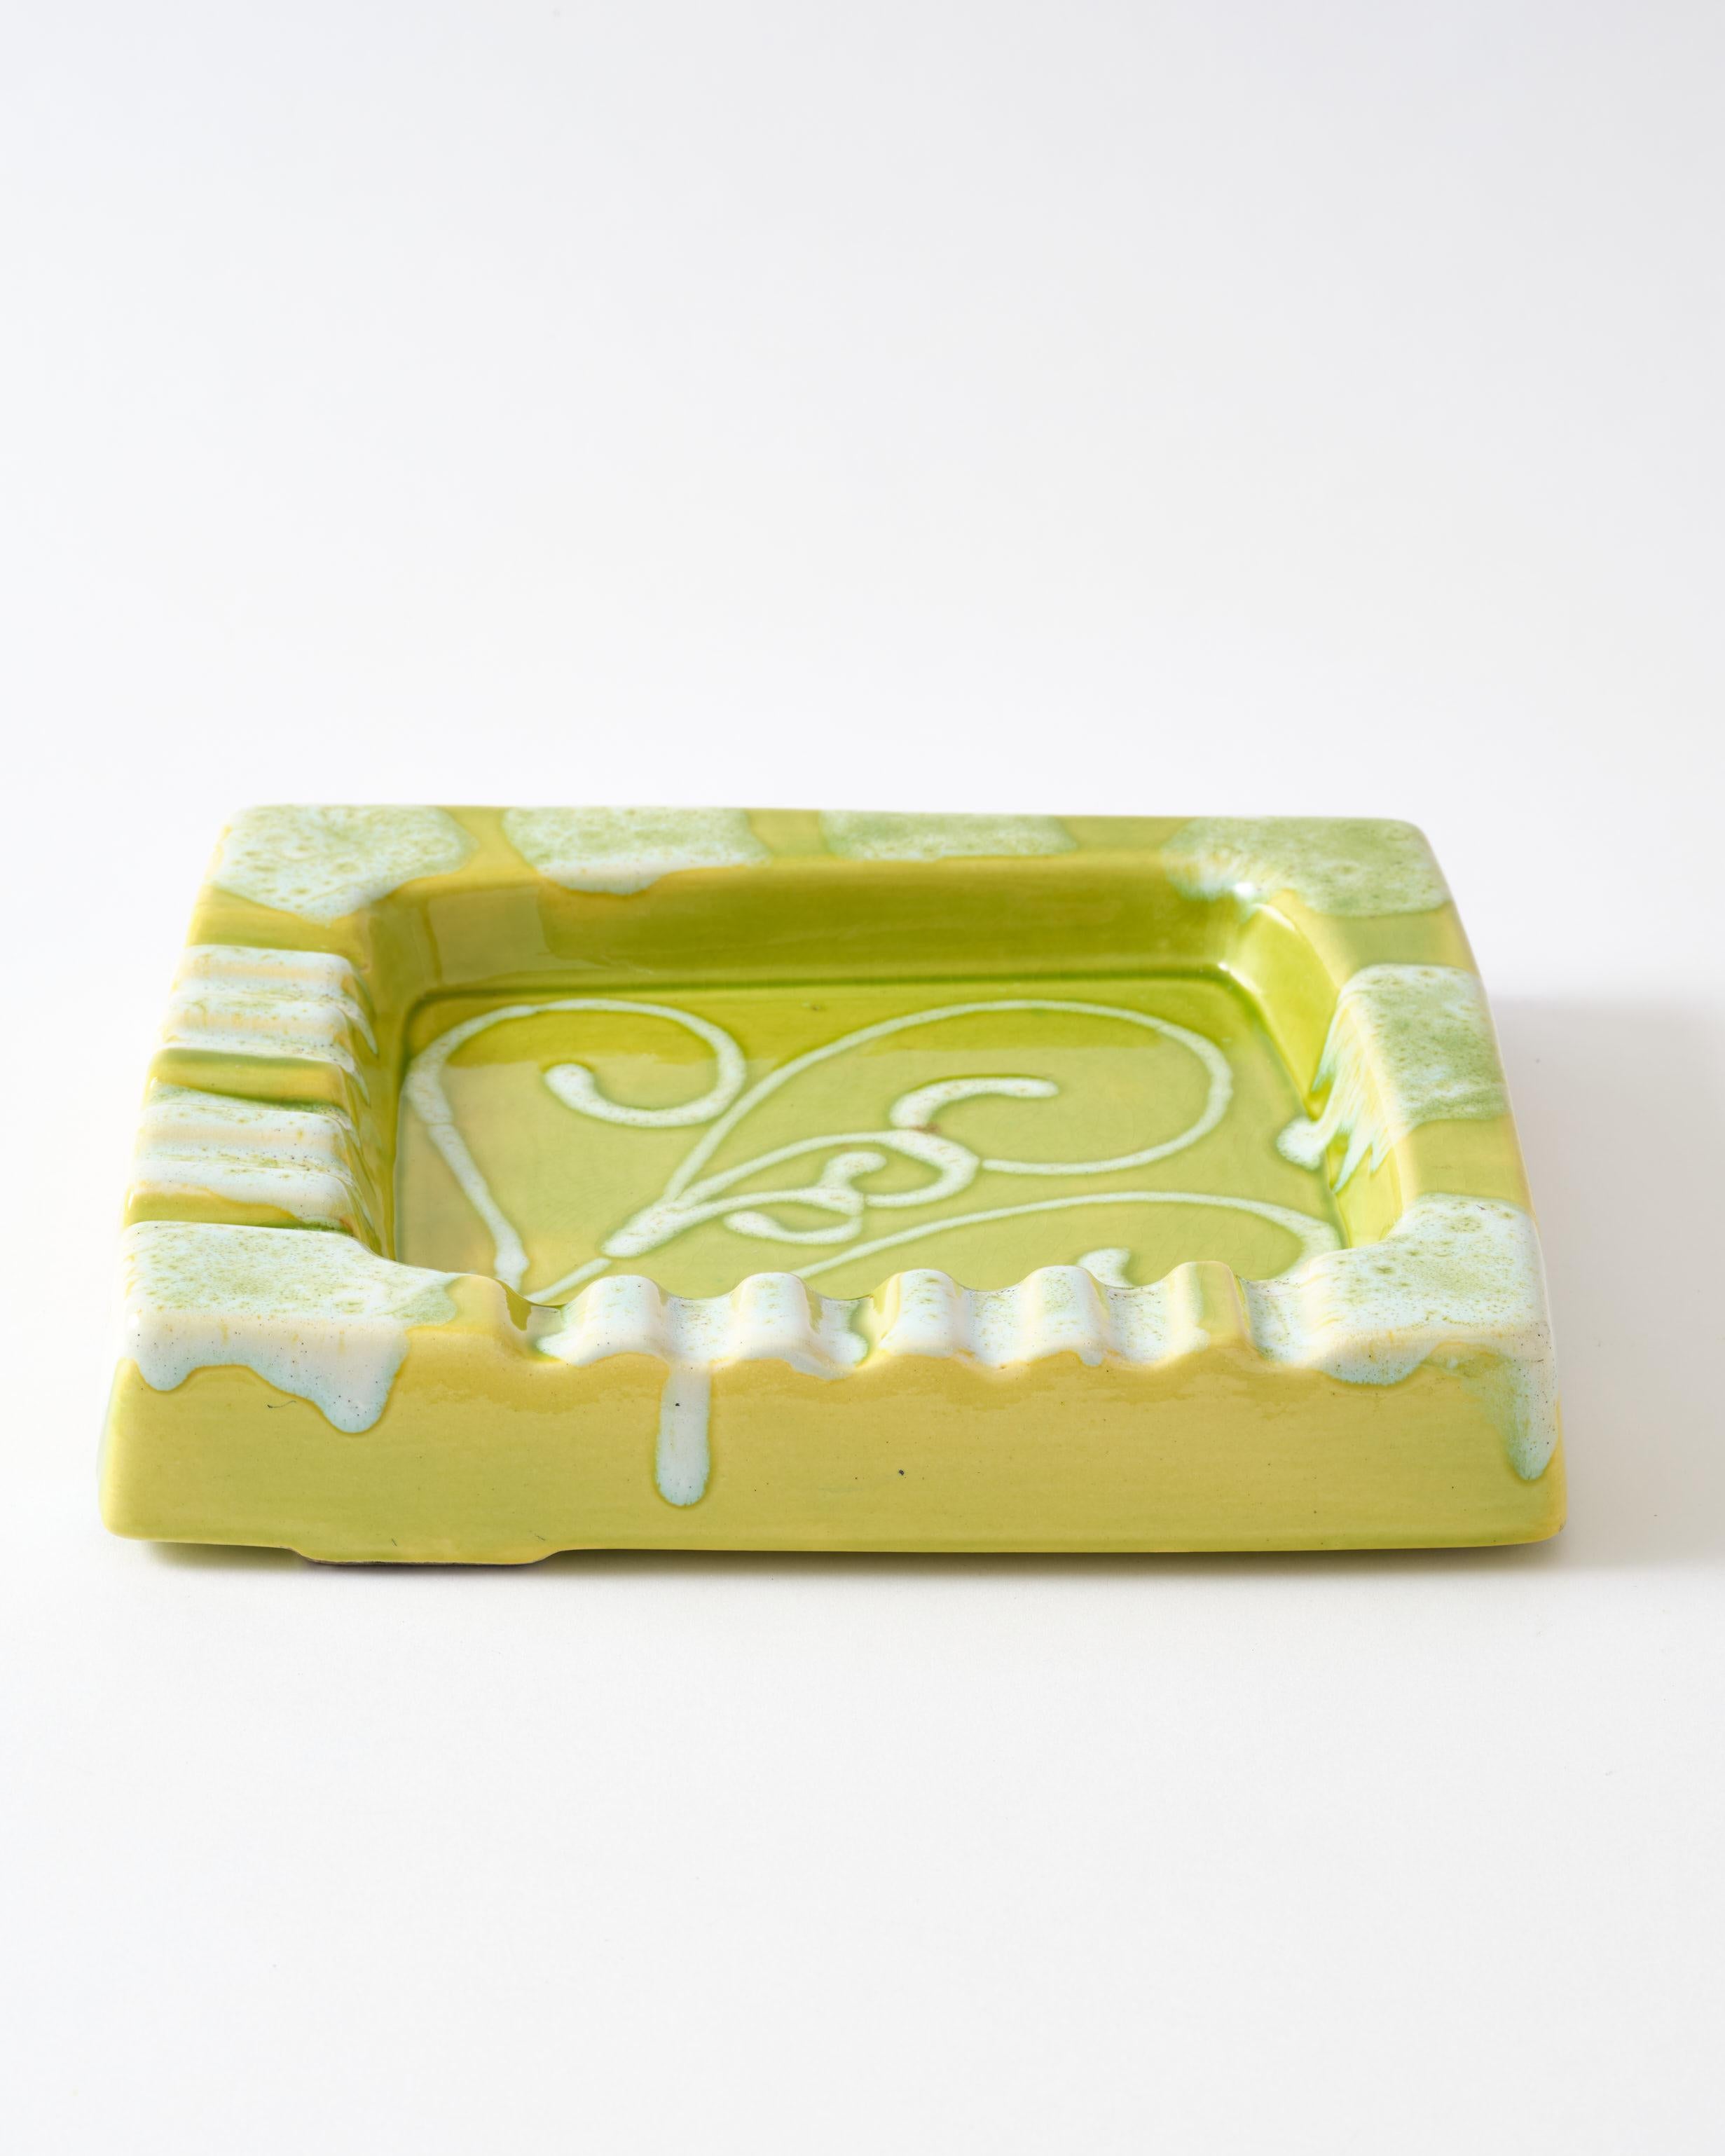 Ceramic Ashtray, Lime Green With White Details, Italy, C 1950, Vintage Ashtray For Sale 6